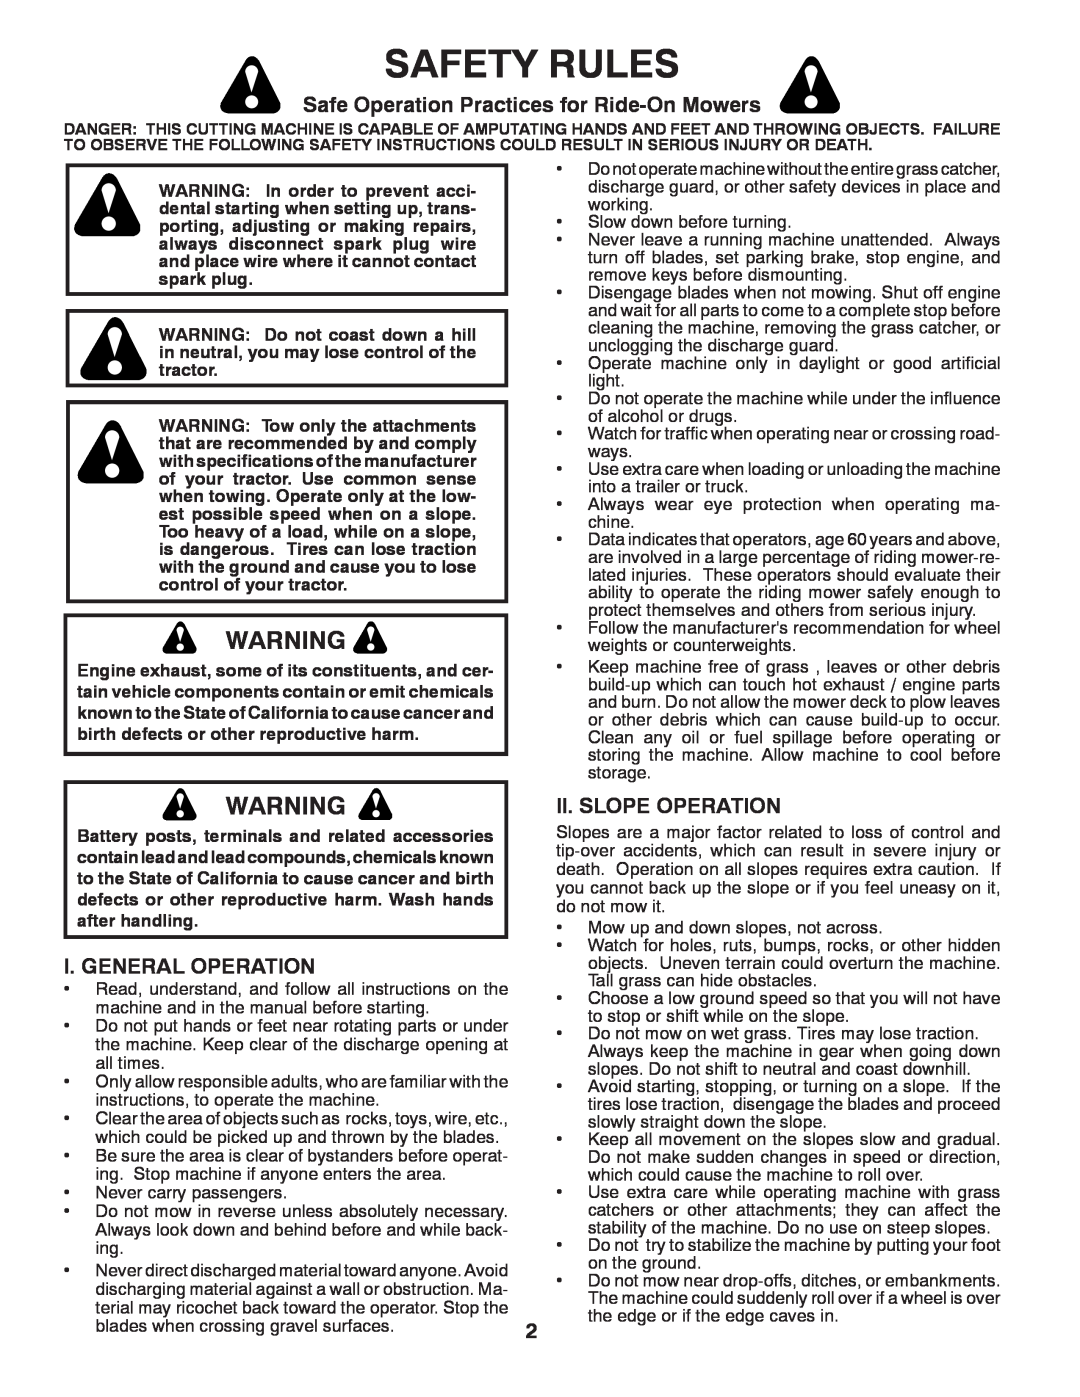 Poulan PP14538 manual Safety Rules, Safe Operation Practices for Ride-On Mowers, I. General Operation, Ii. Slope Operation 